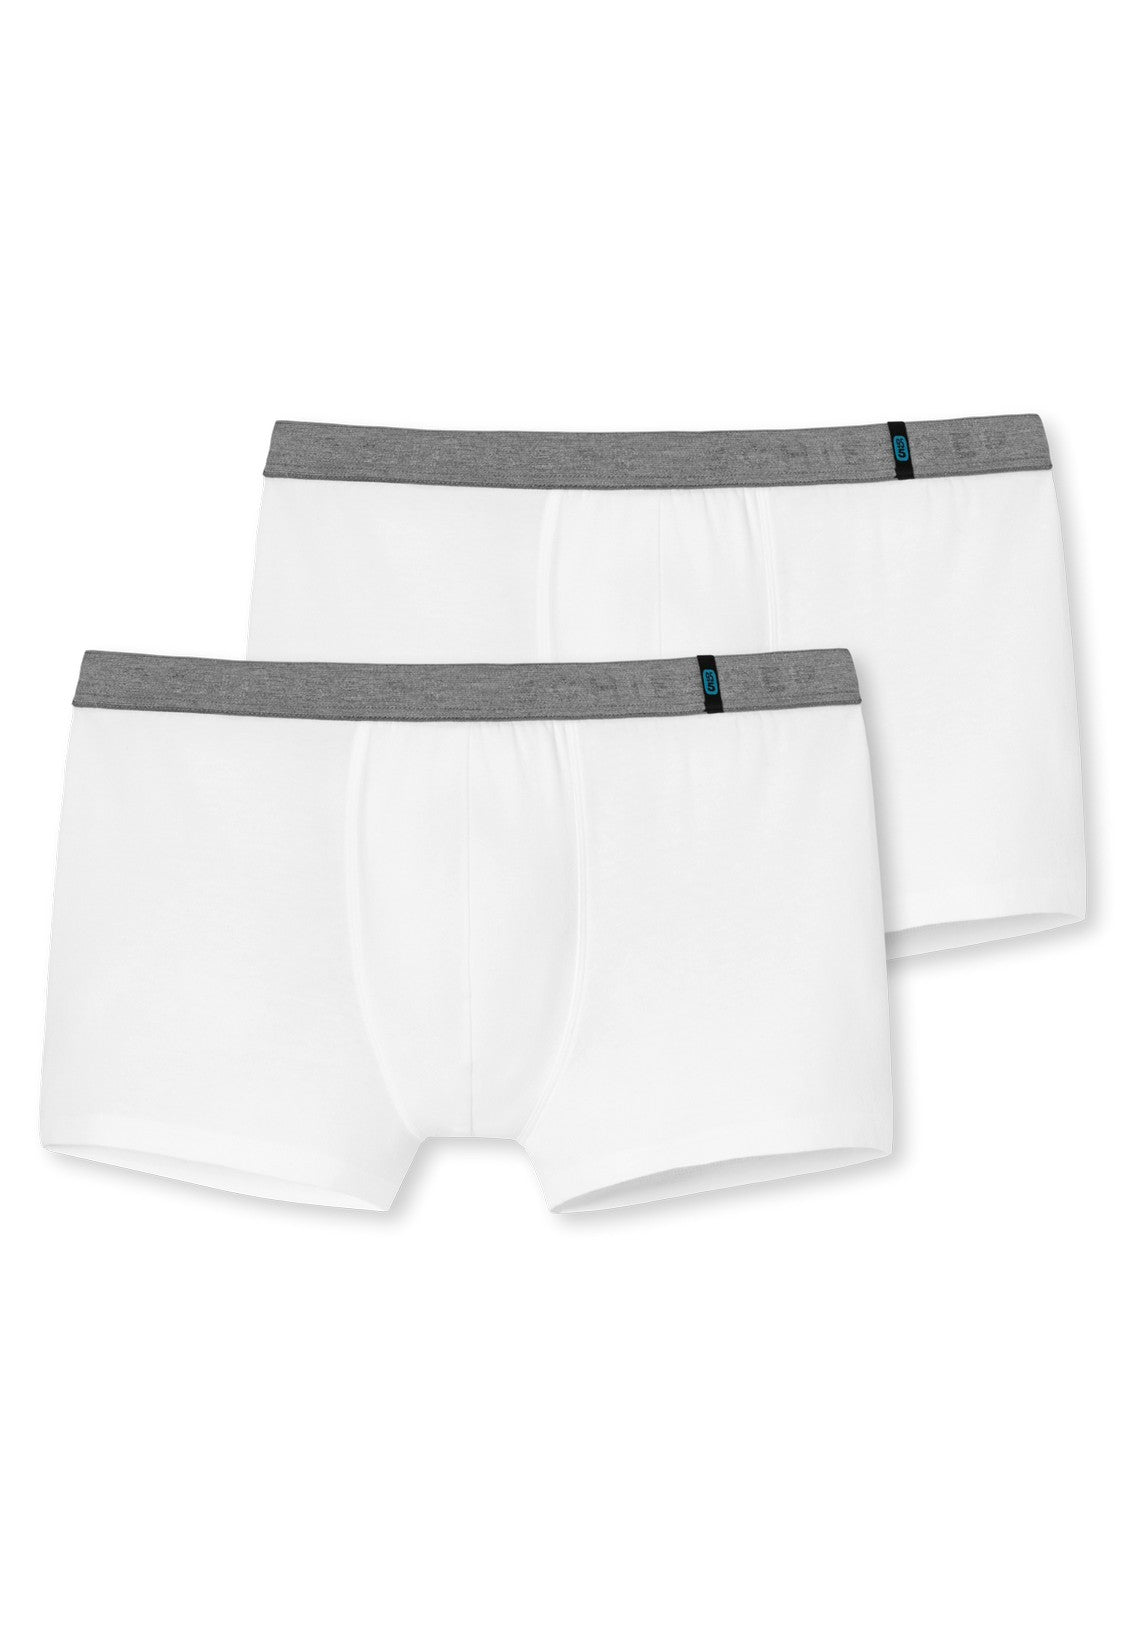 Shorts 2Pack 95/5 (was 205551) 155587